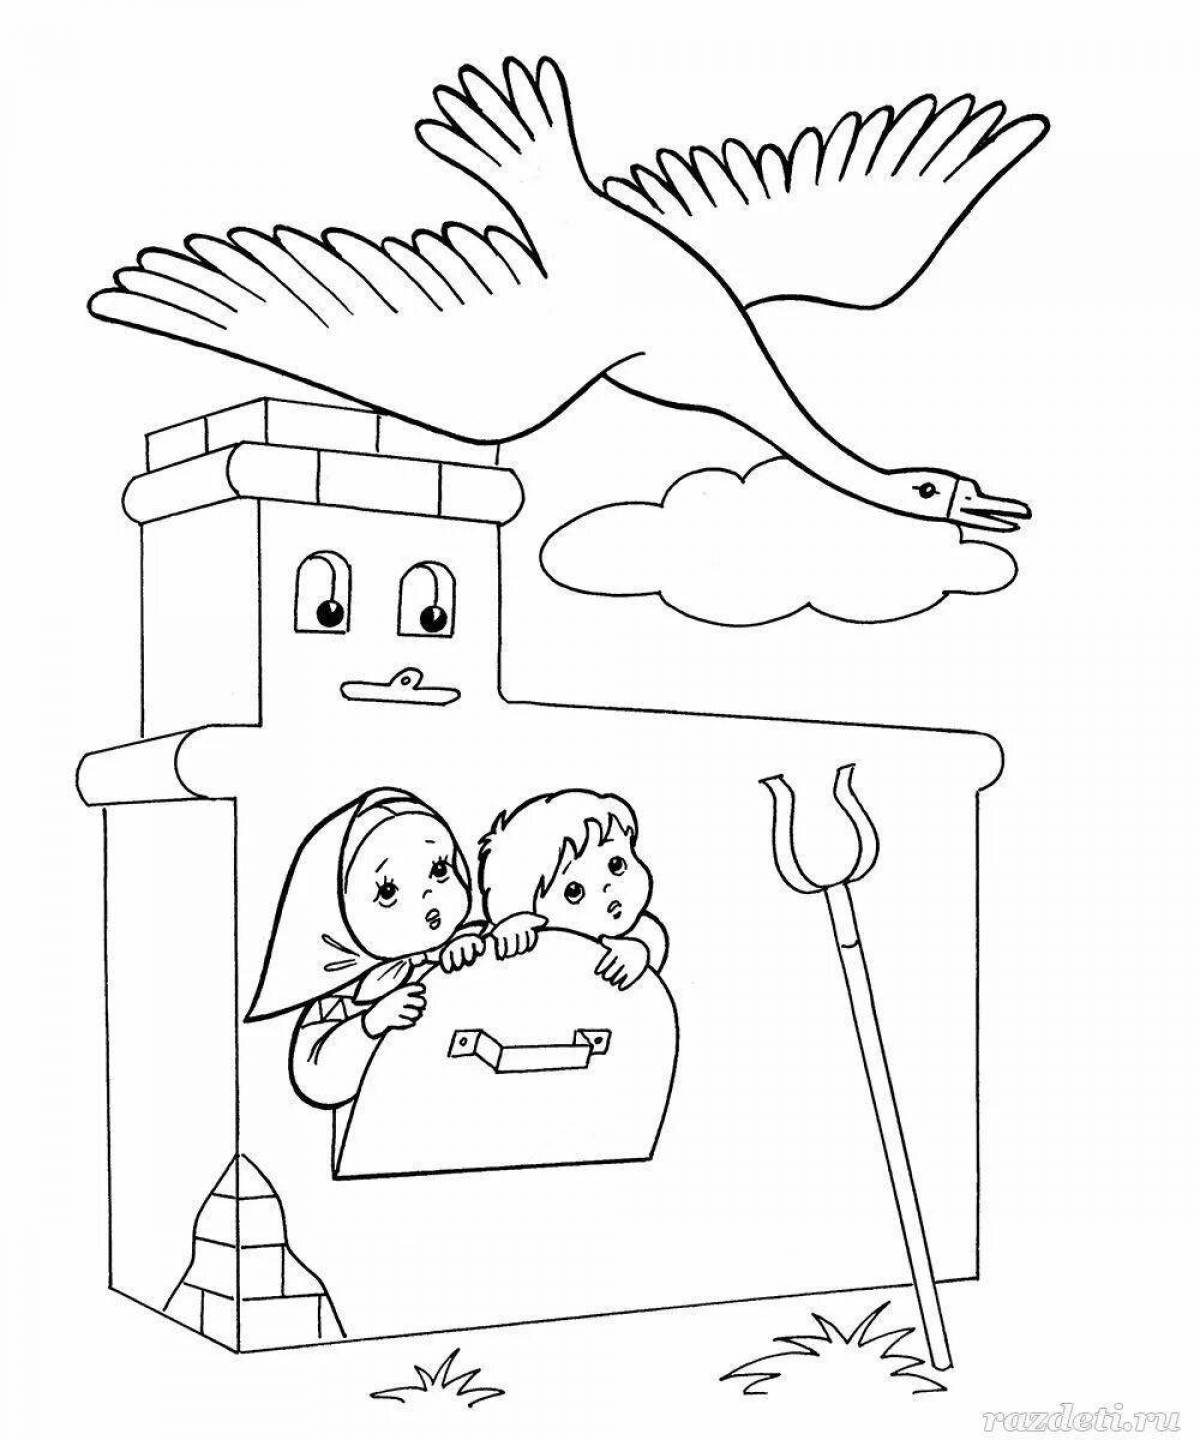 Large swan geese coloring book for kids